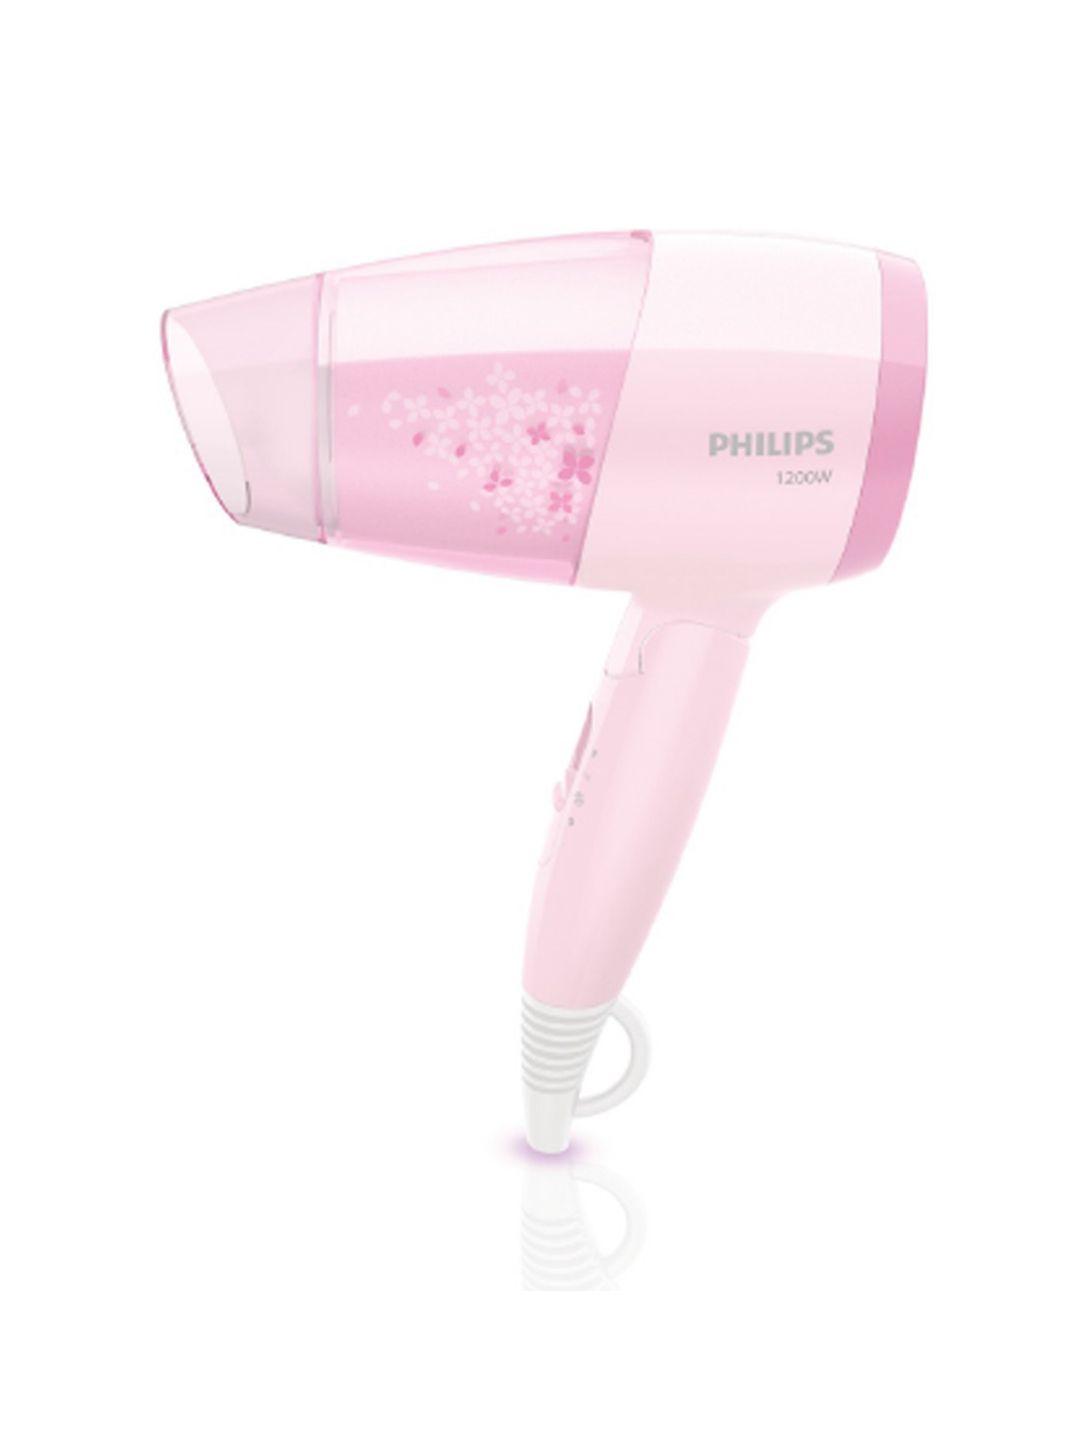 Philips BHC017/00 ThermoProtect 1200 W Hair Dryer-  Pink Price in India